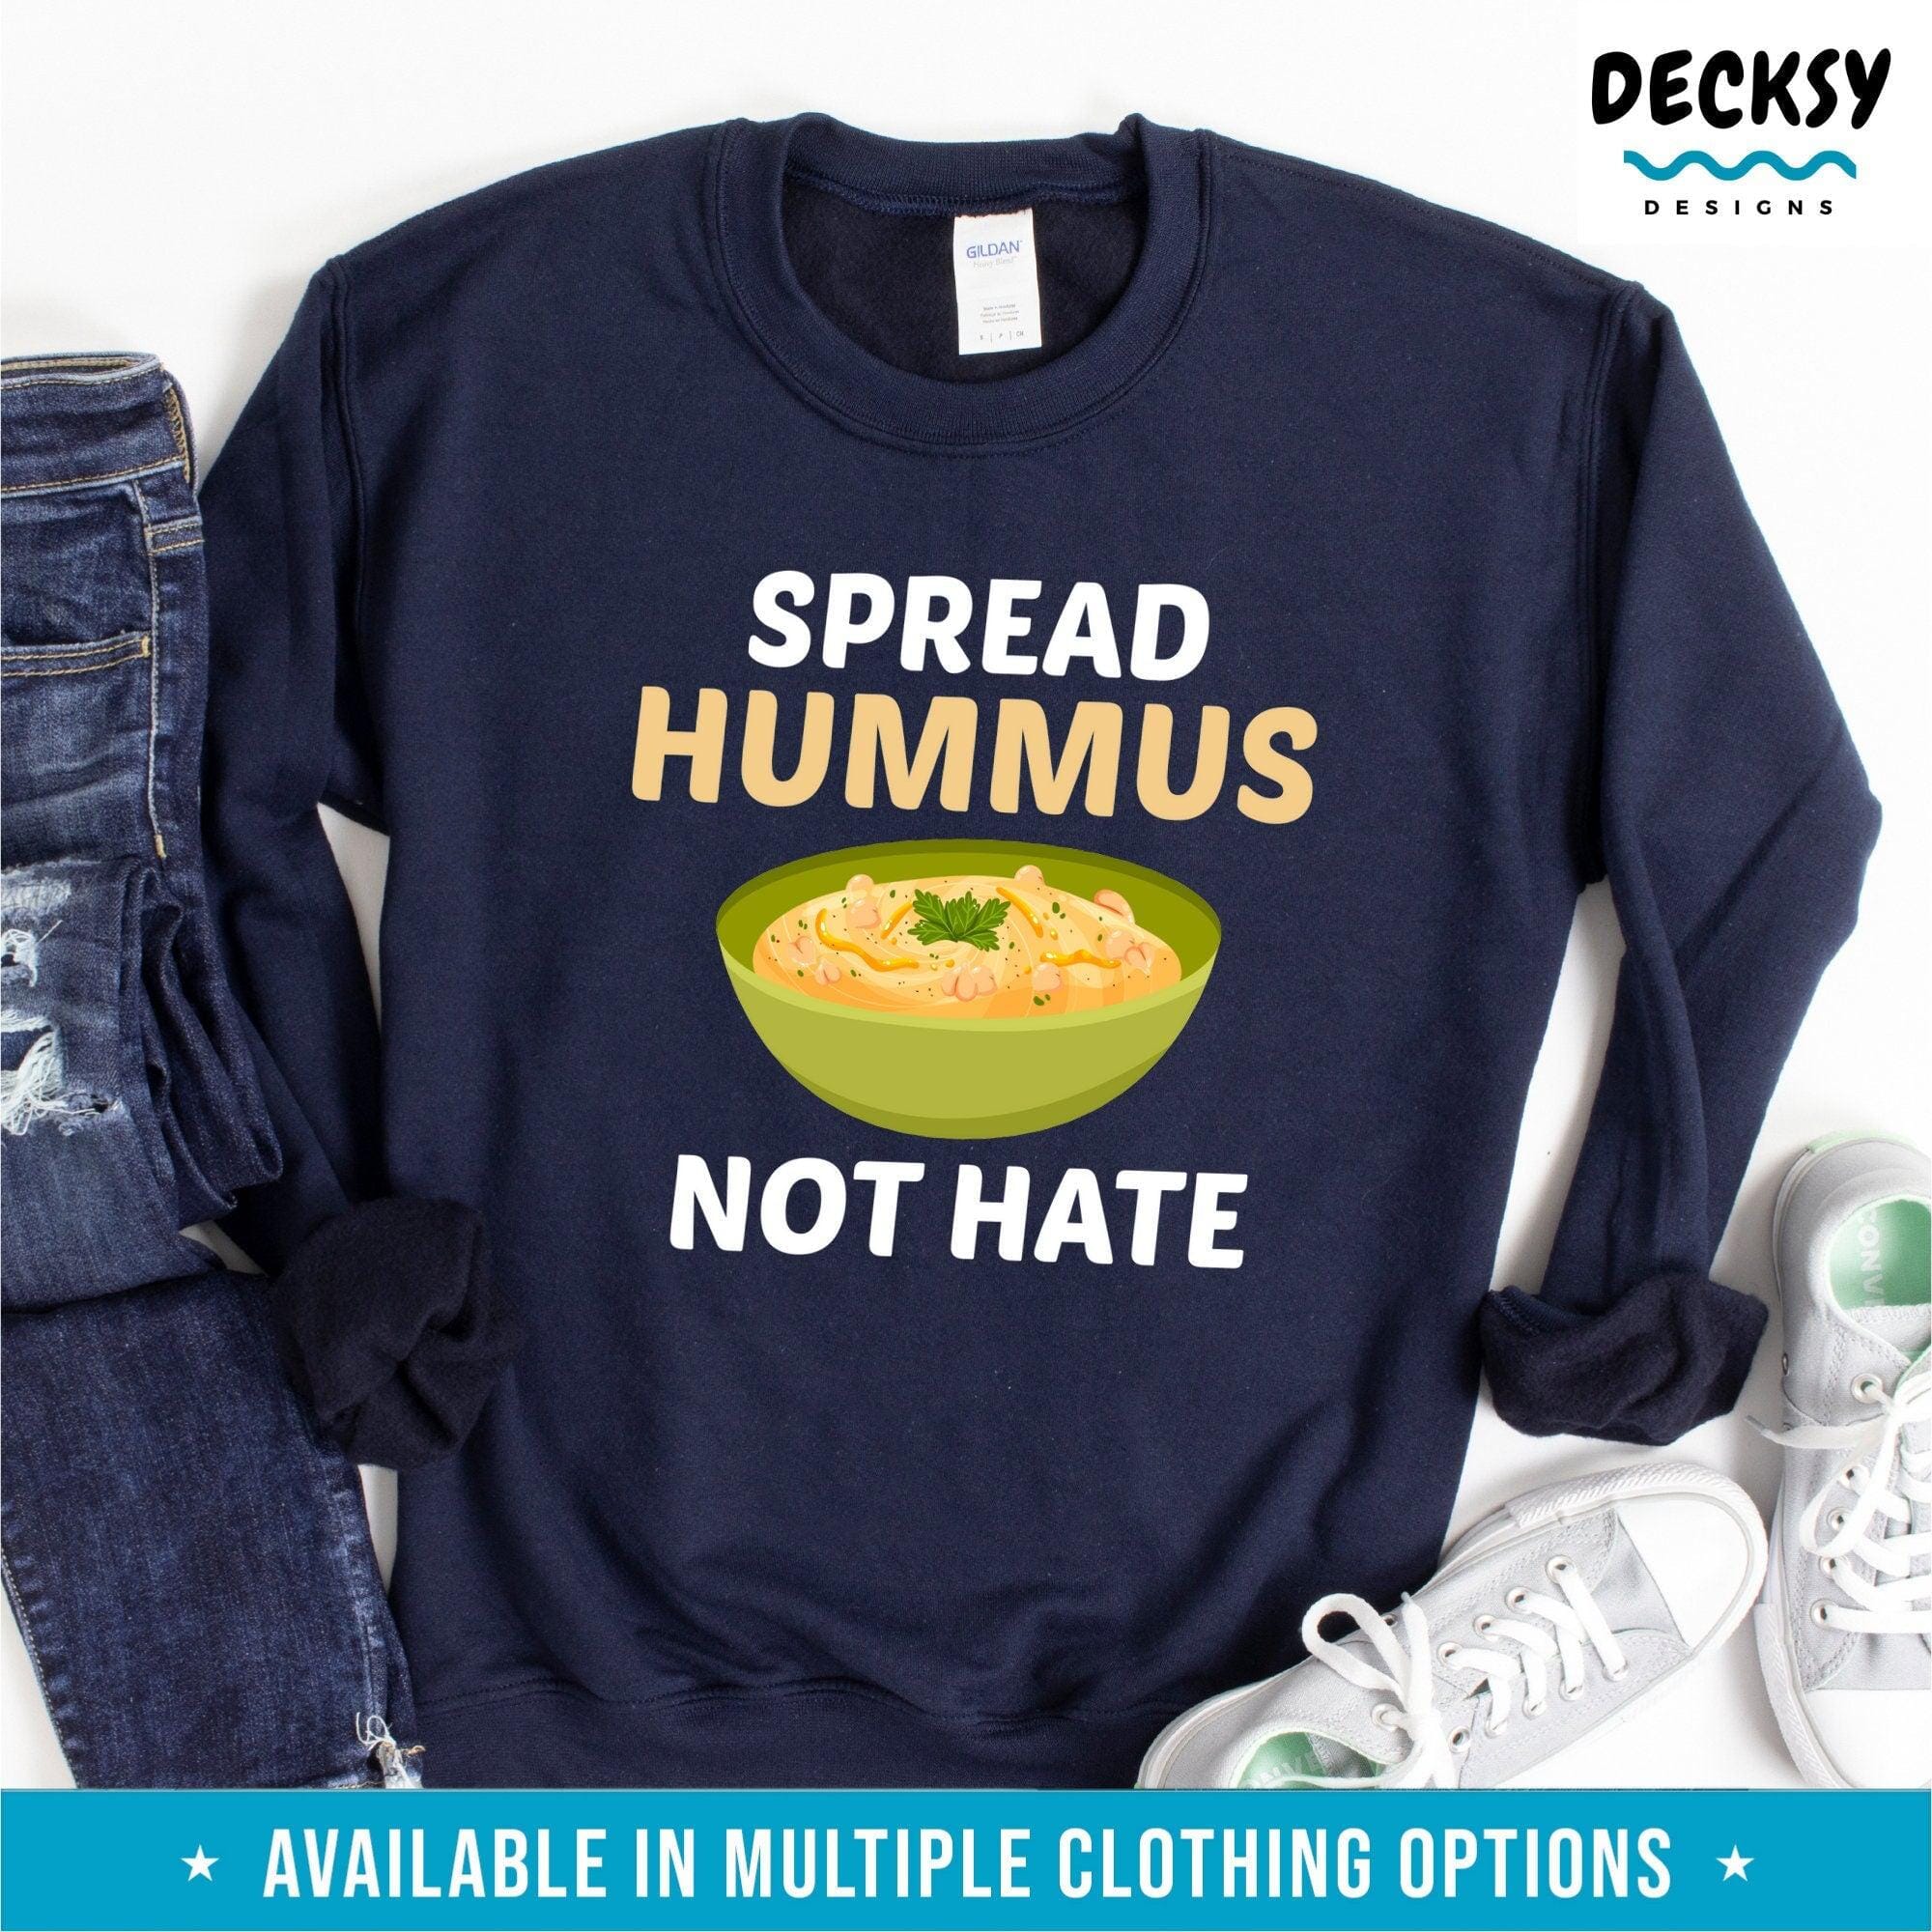 Hummus Shirt, Lebanese Food Lover Gift-Clothing:Gender-Neutral Adult Clothing:Tops & Tees:T-shirts:Graphic Tees-DecksyDesigns